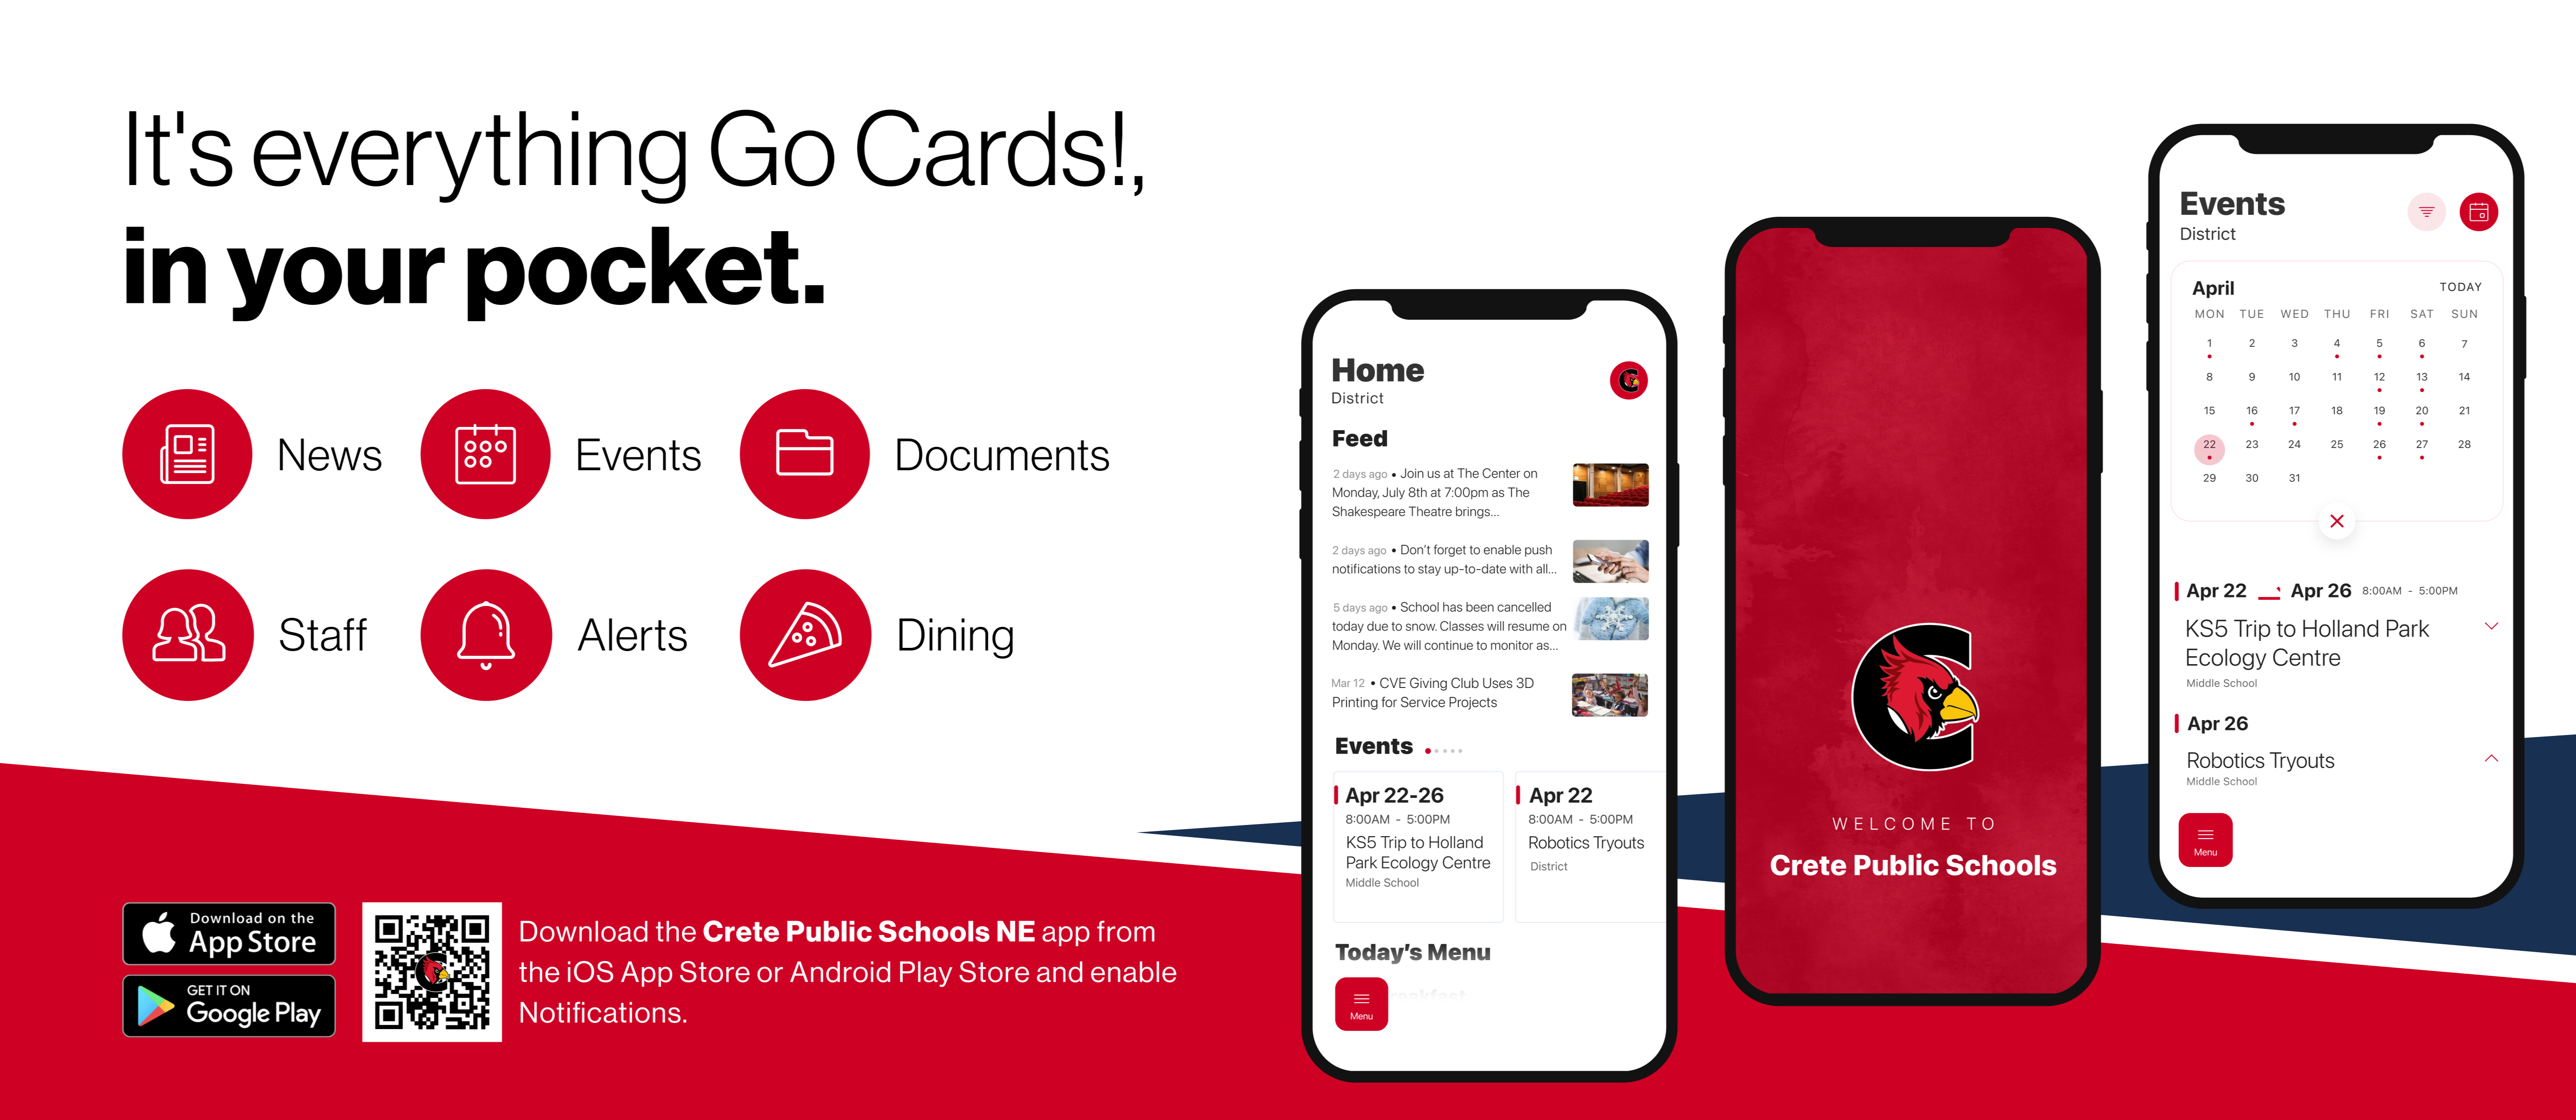 everything Go Cards in your pocket